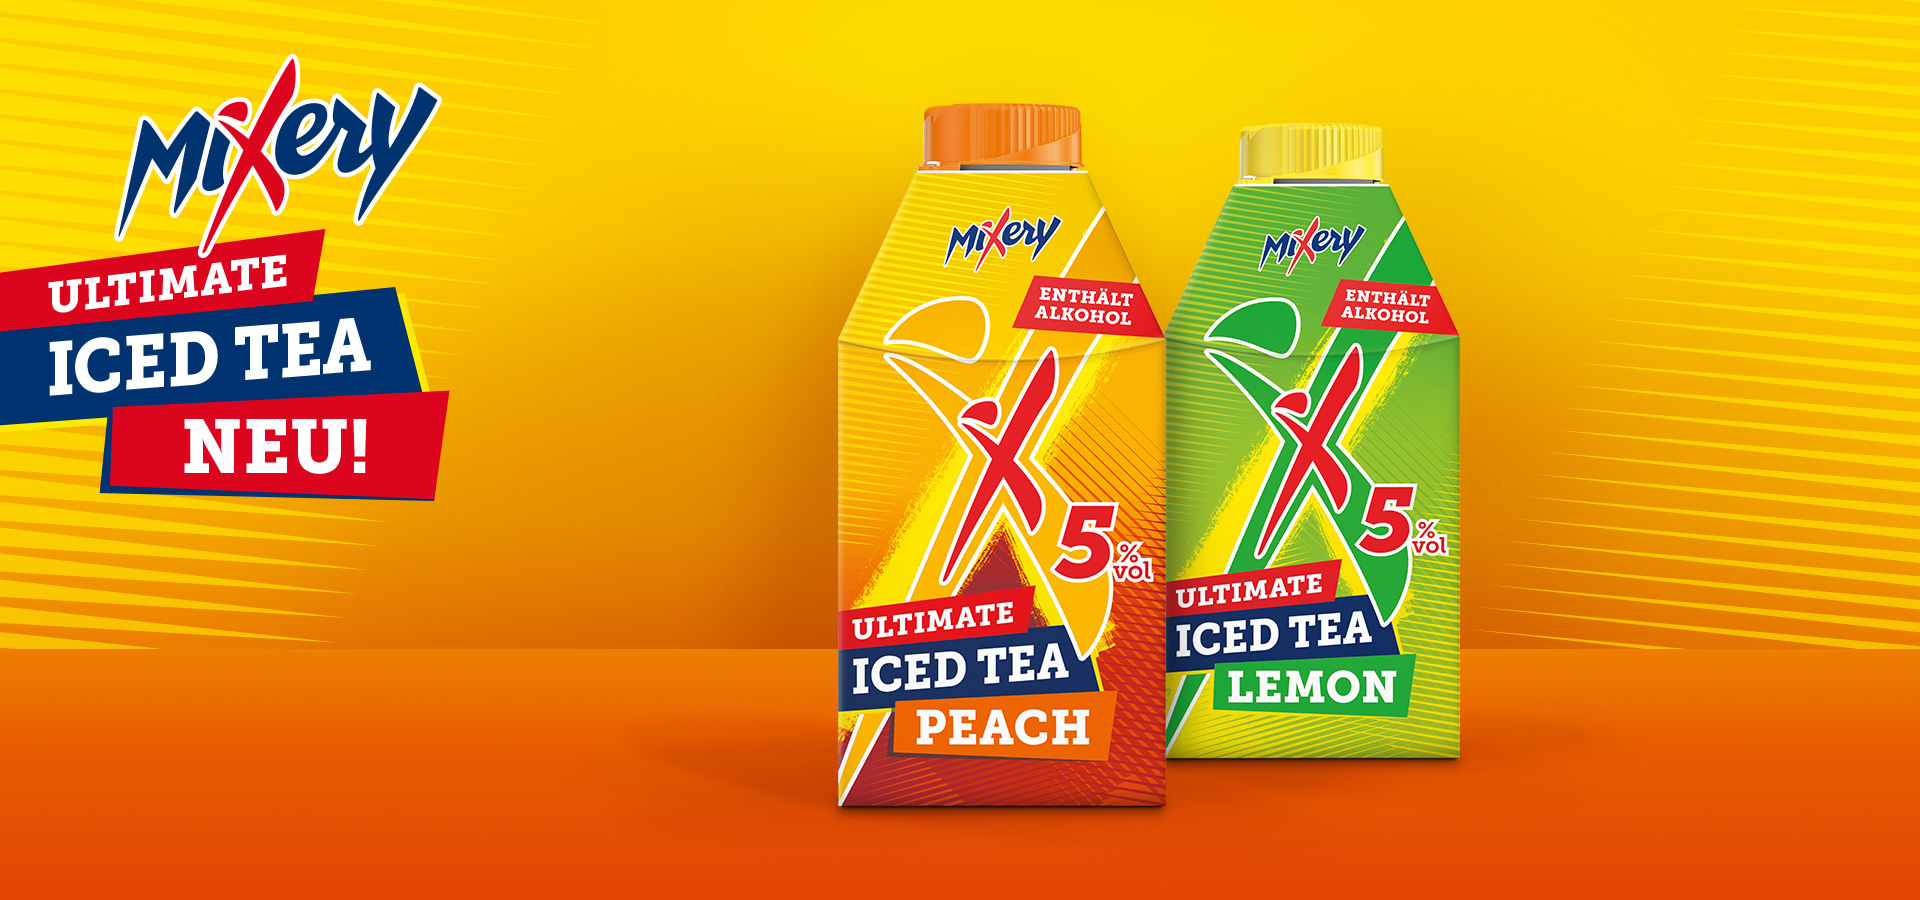 Packaging Design Mixery Ultimate Iced Tea